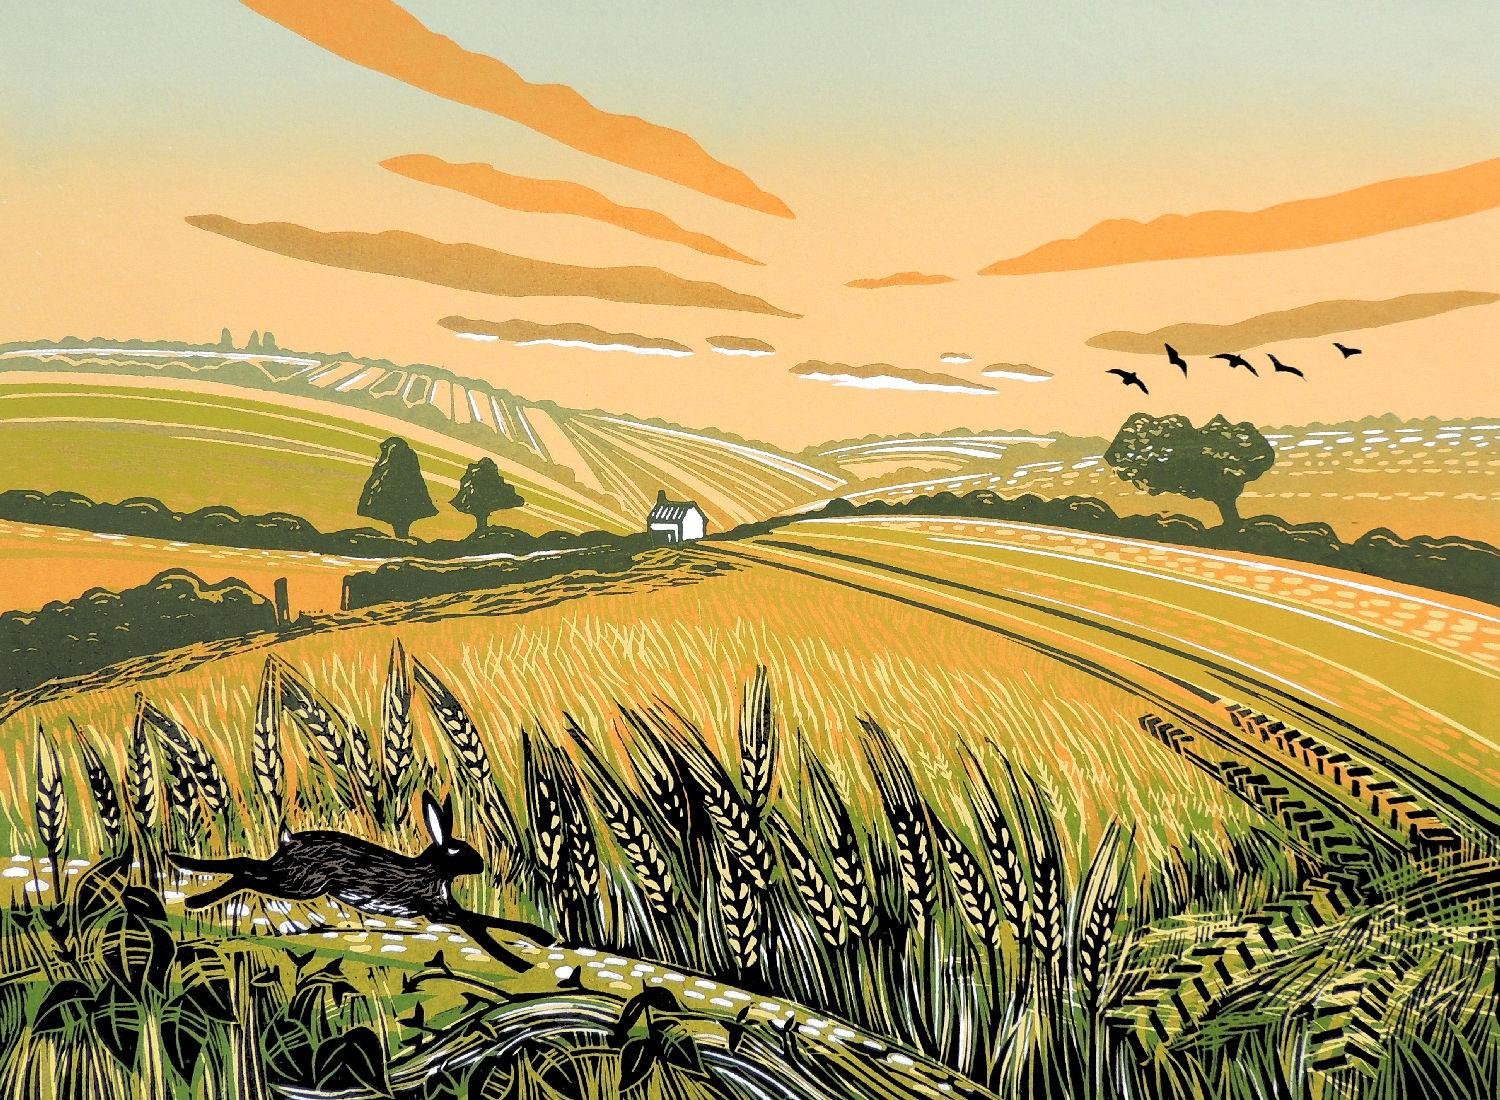 Running Through The Barley, Limited edition art print, Landscape, Nature, Fields